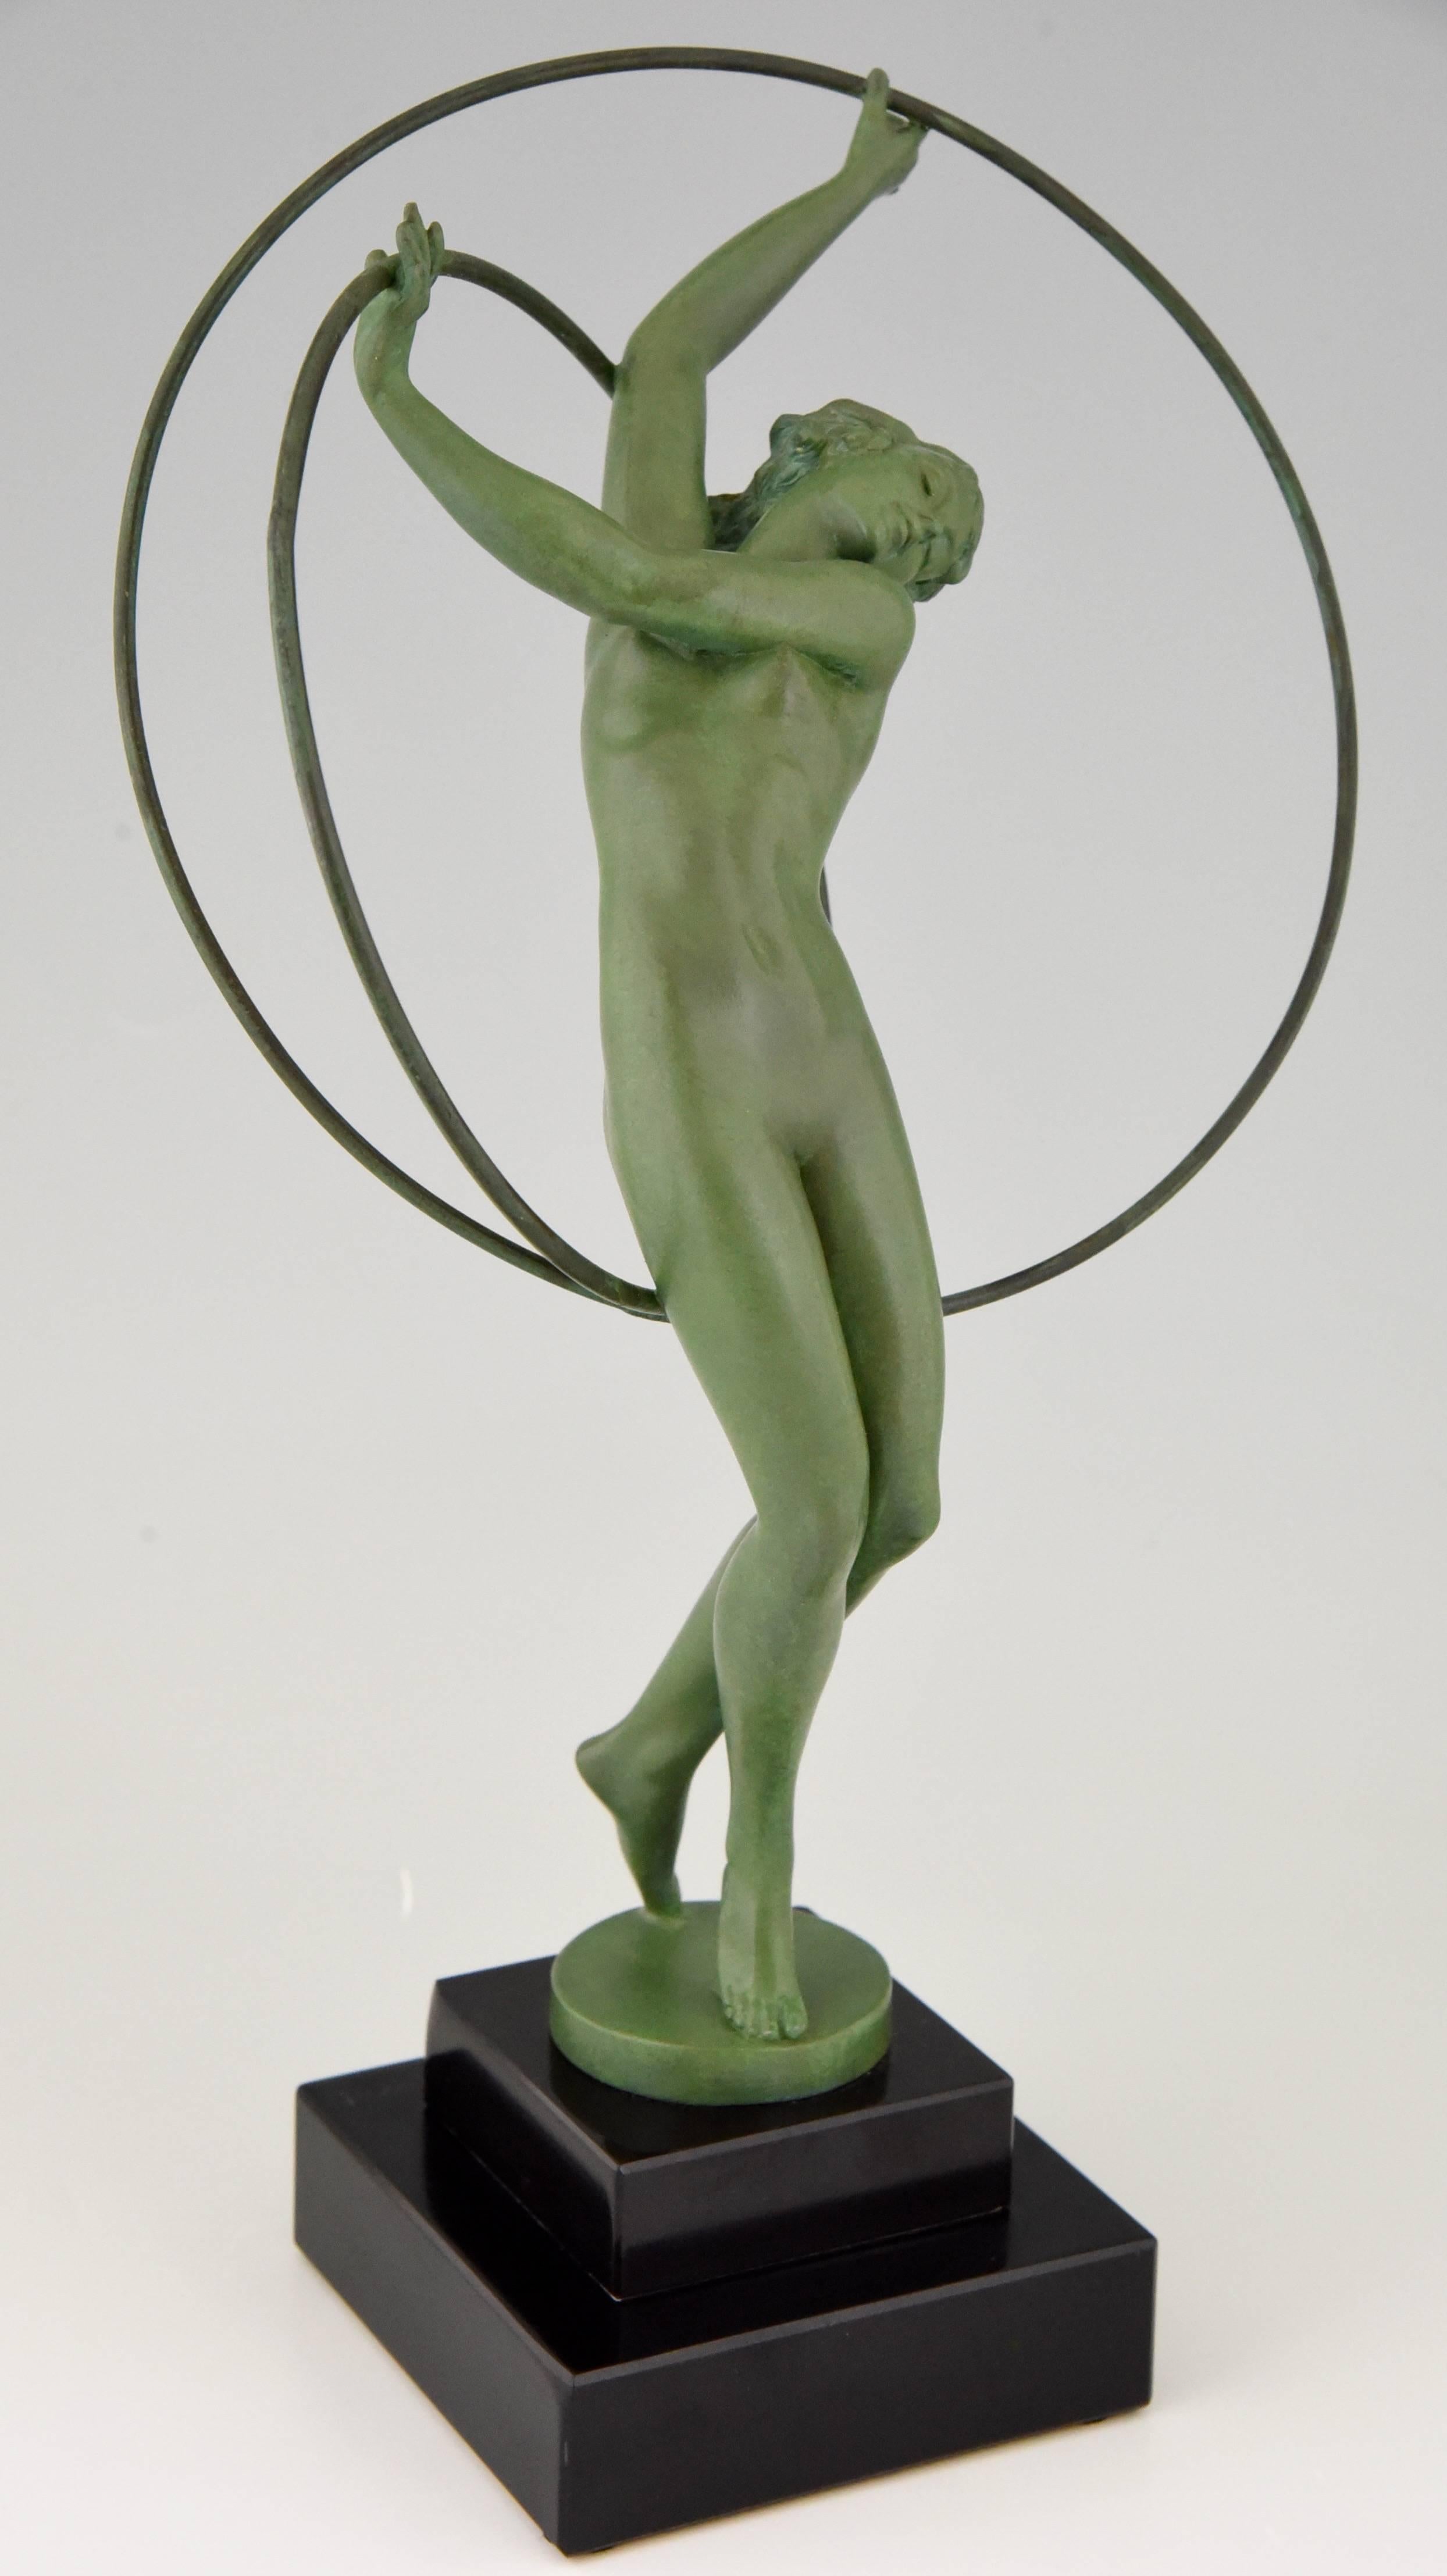 Patinated French Art Deco Sculpture Nude Hoop Dancer by Fayral, Pierre Le Faguays, 1930